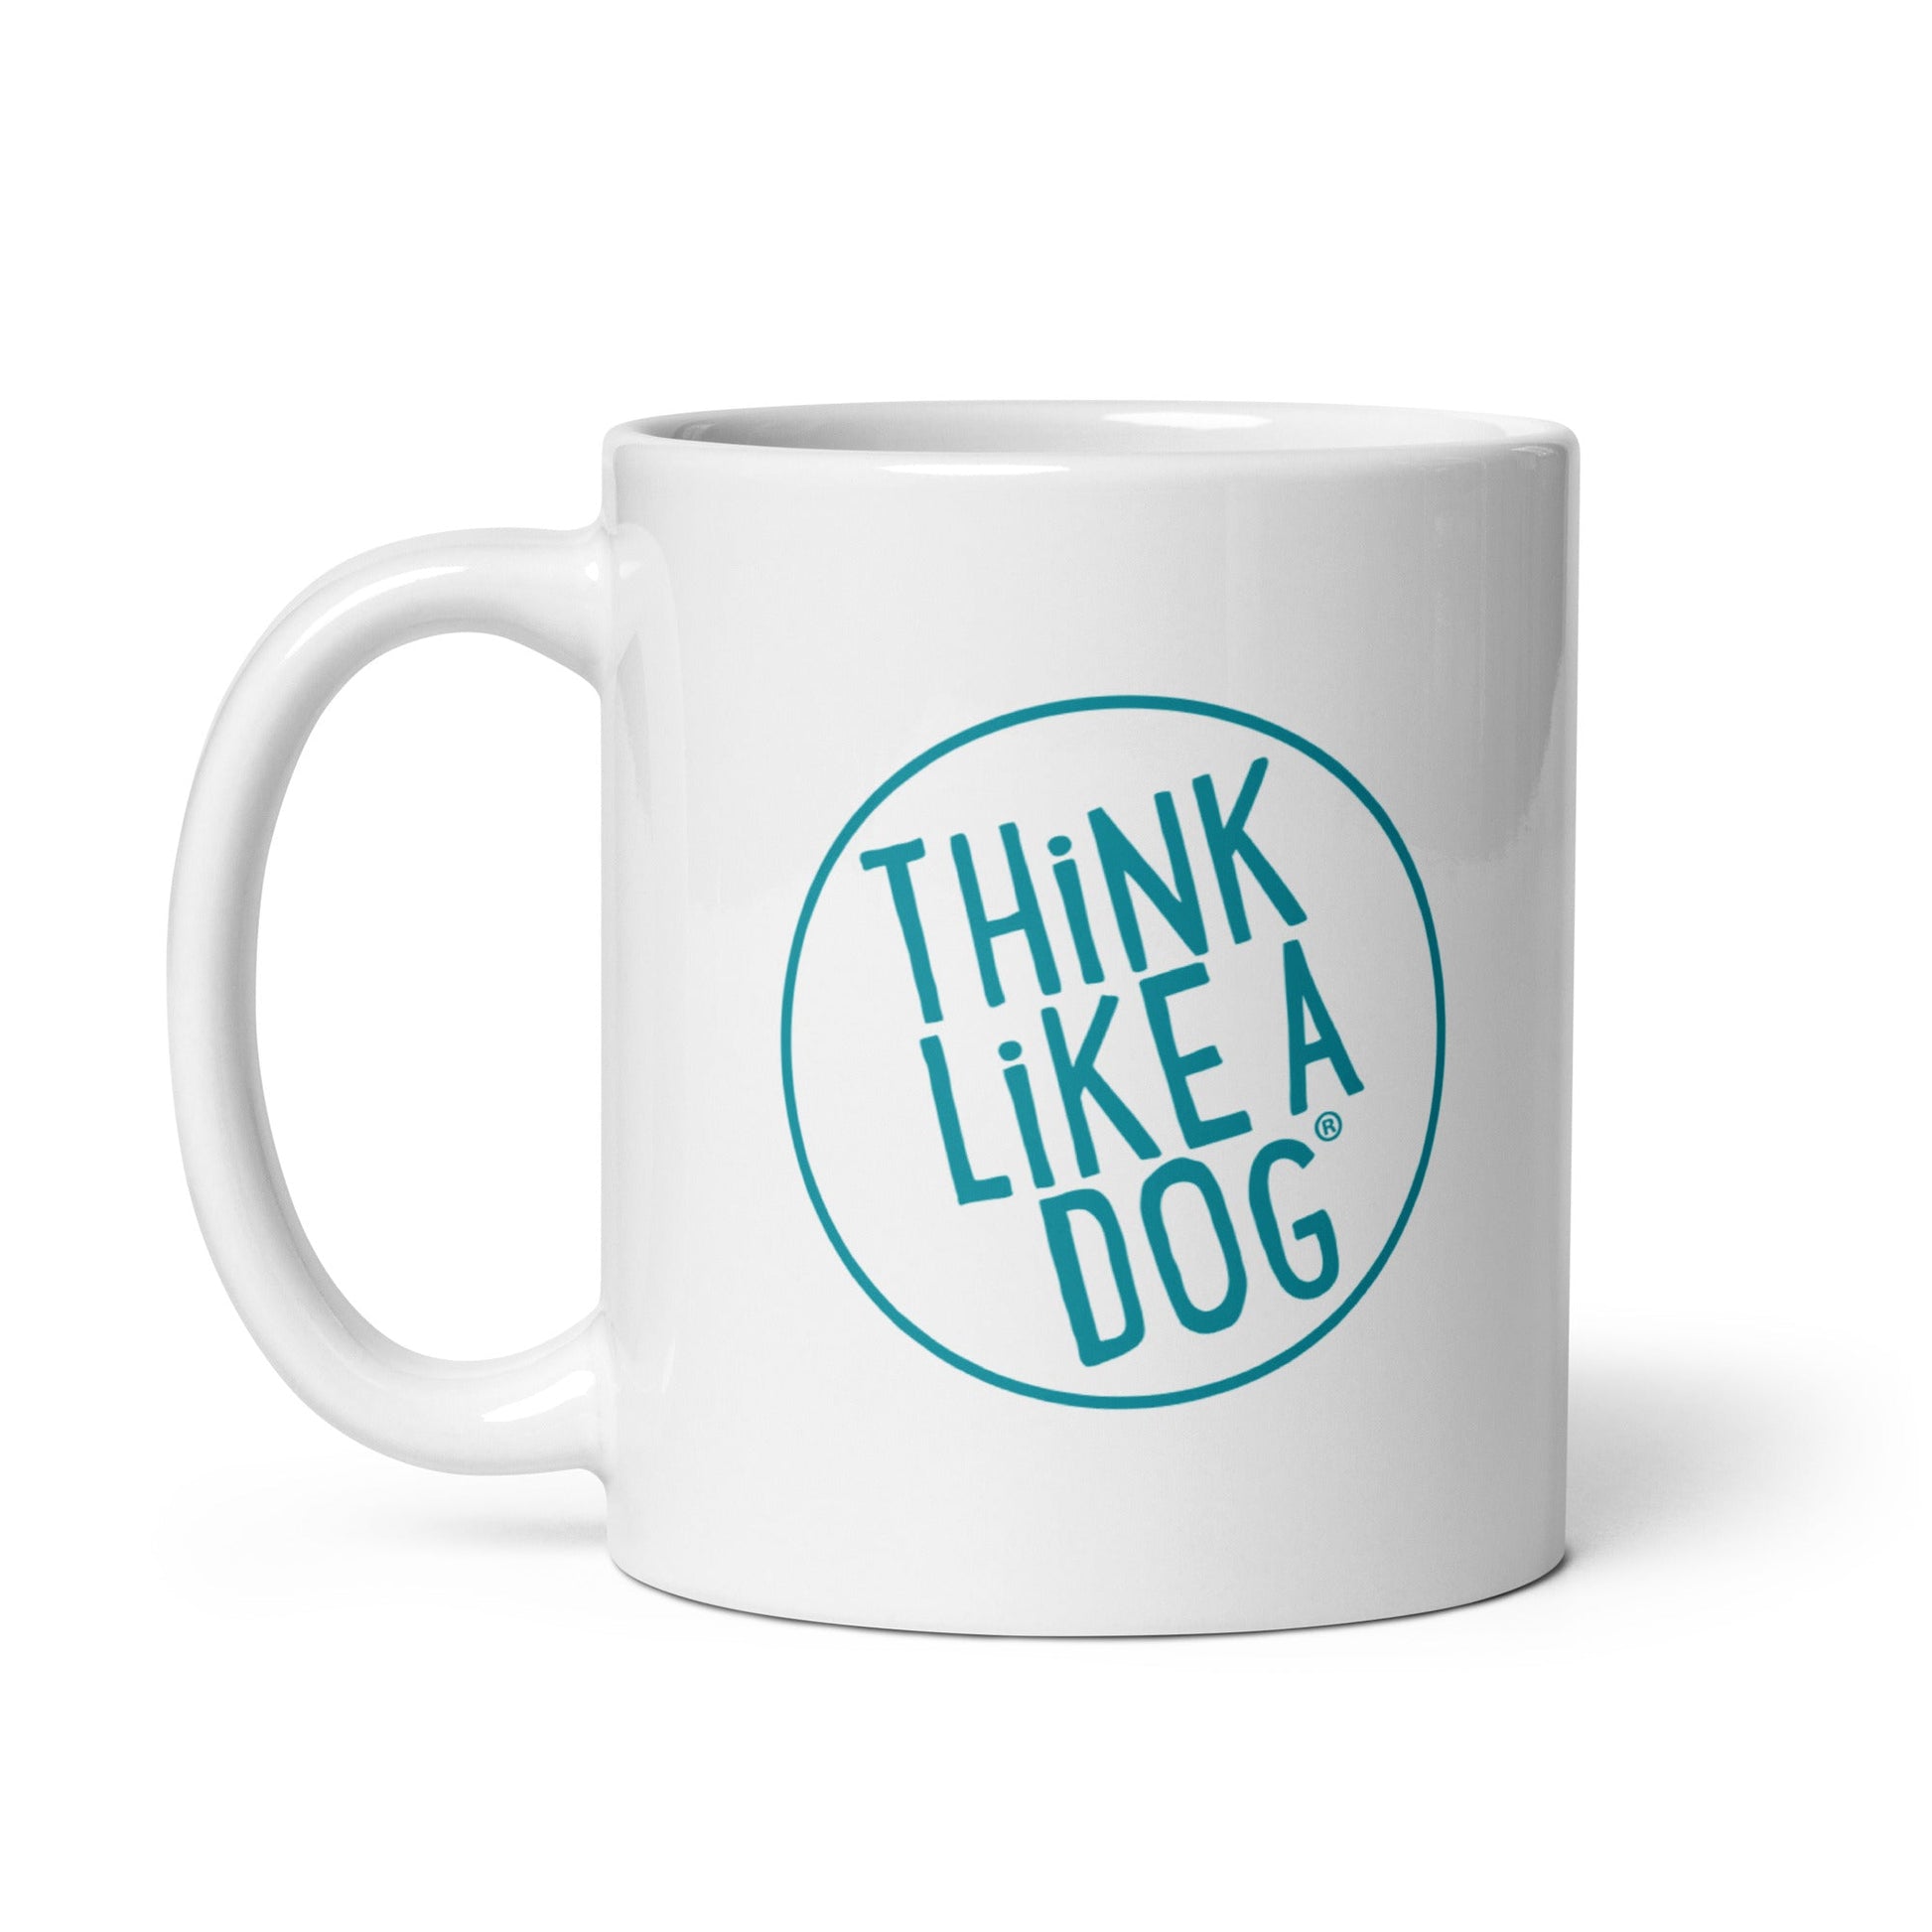 White Glossy Mug Teal THiNK LiKE A DOG® Logo with the phrase "THiNK LiKE A DOG®" printed on it, perfect for dog lovers.